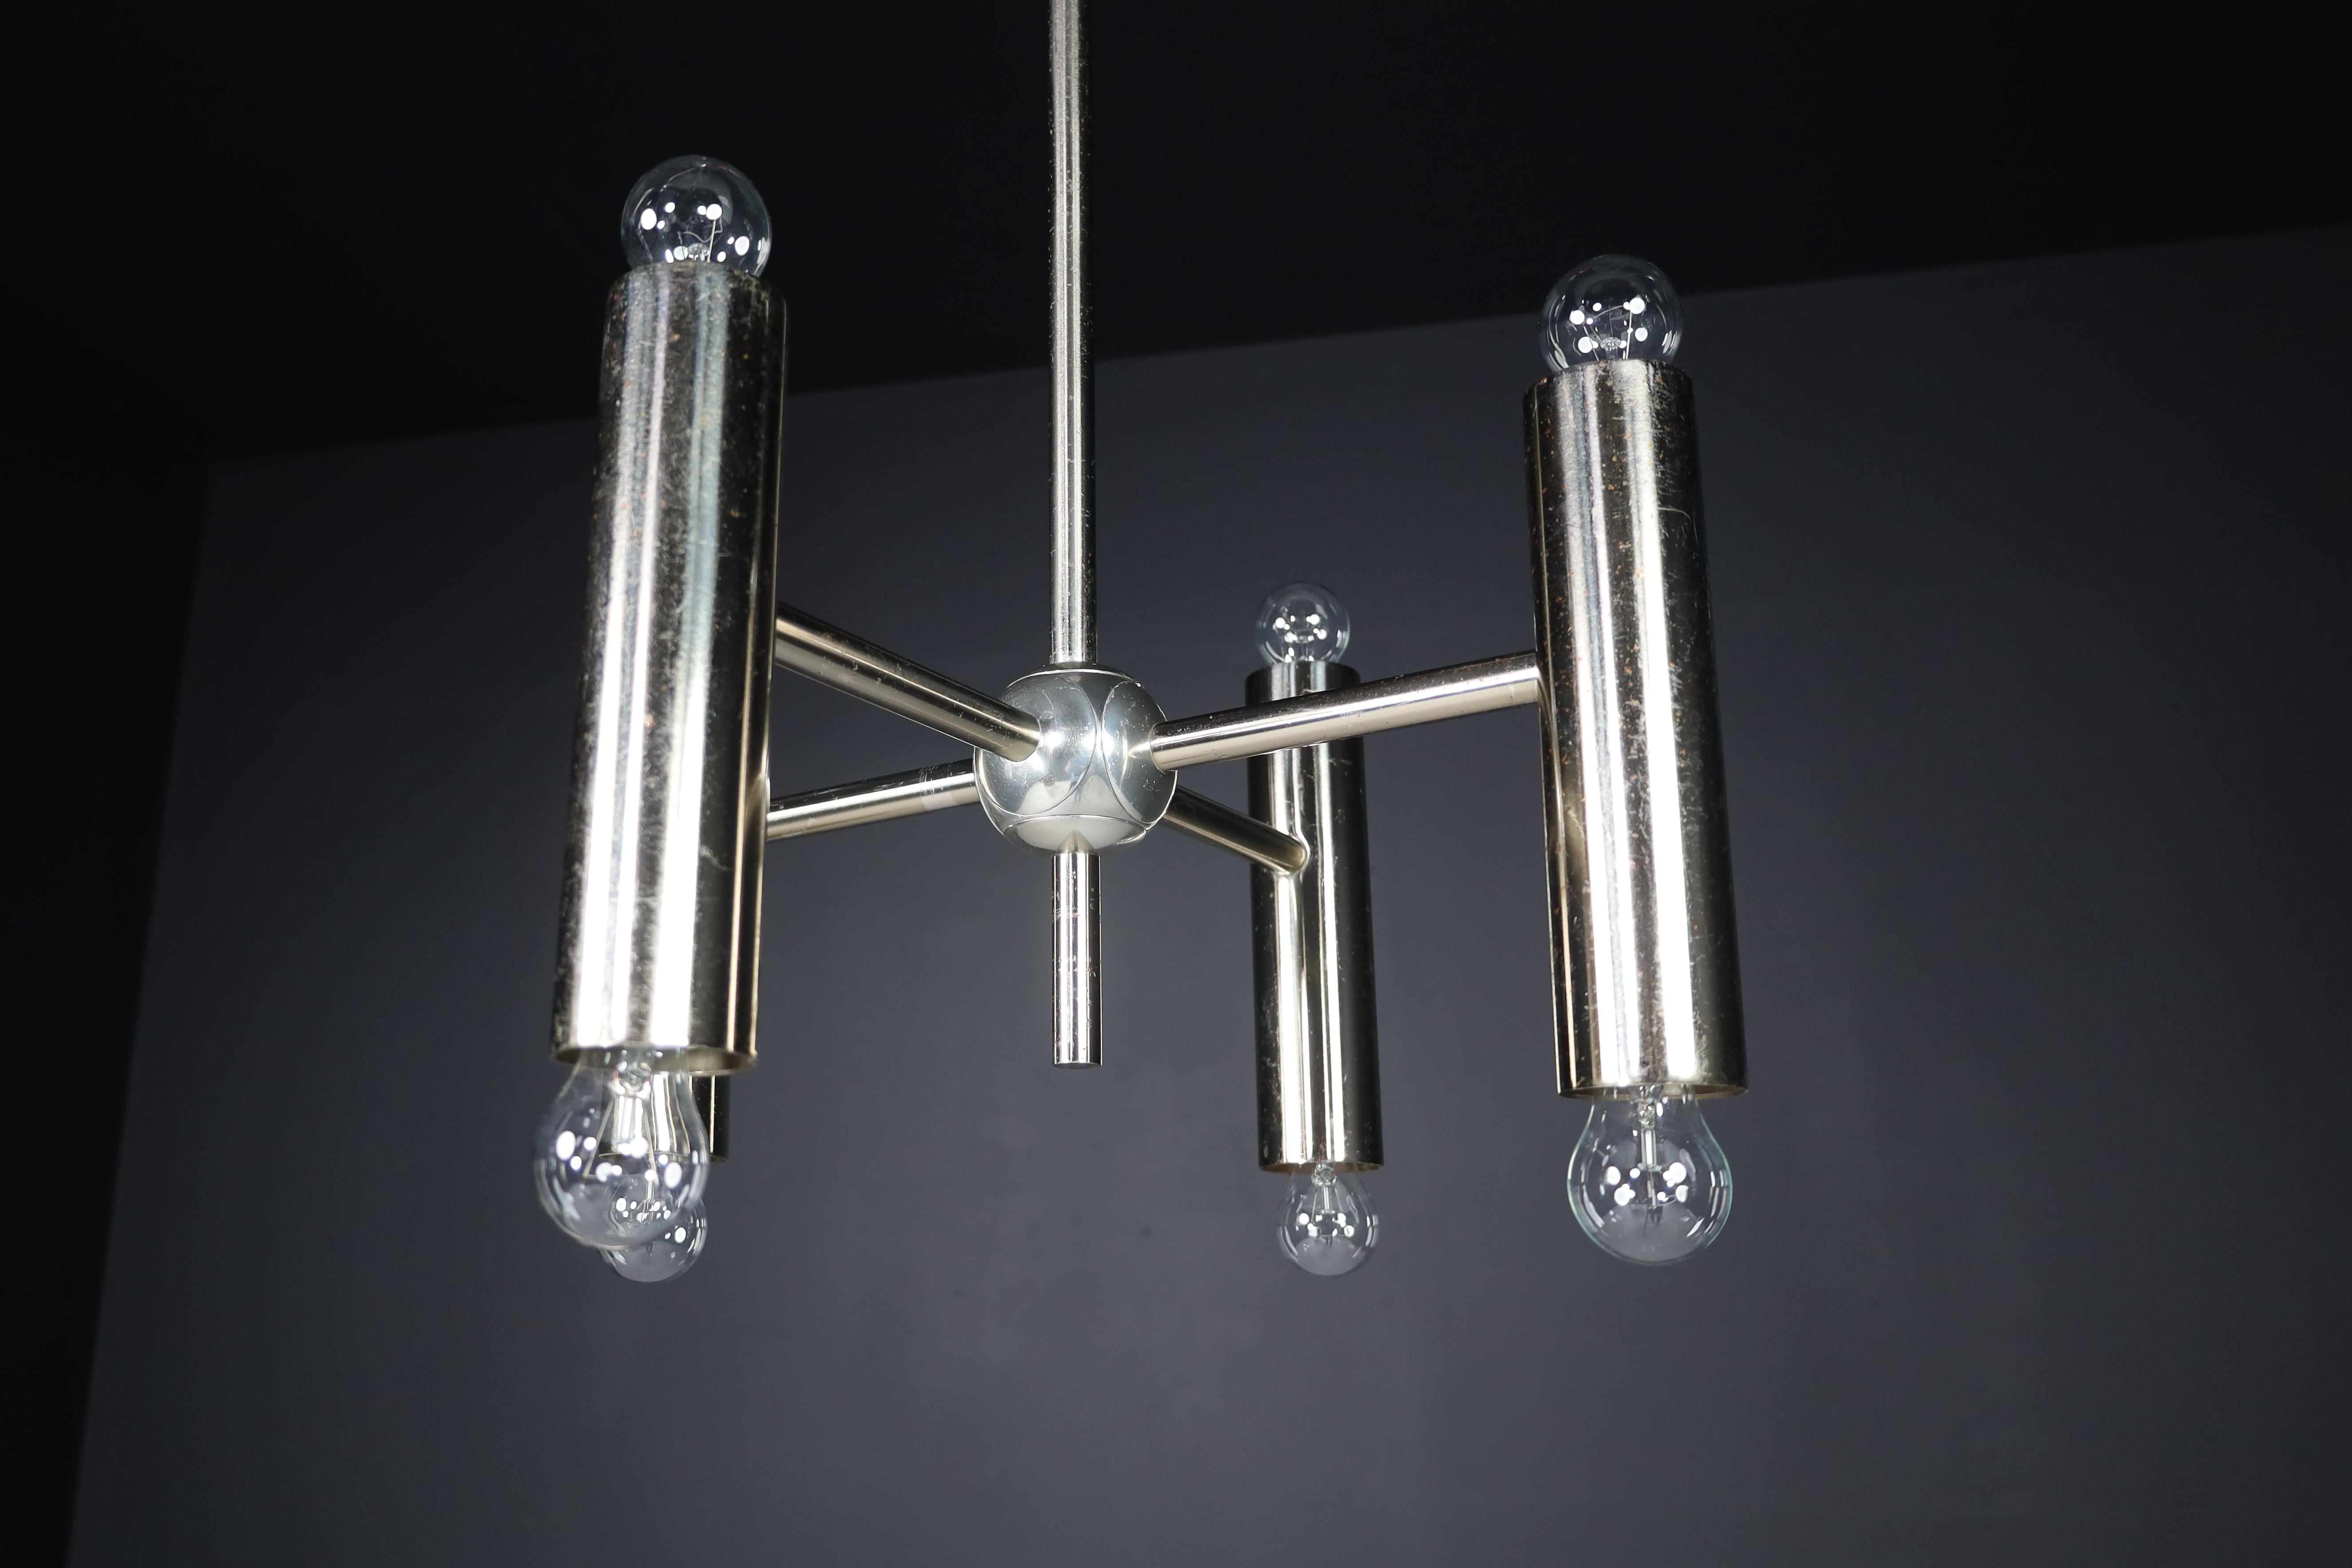 1 of 6 Minimalistic Design Geometric Chandeliers in Chrome, Germany, 1970s For Sale 3